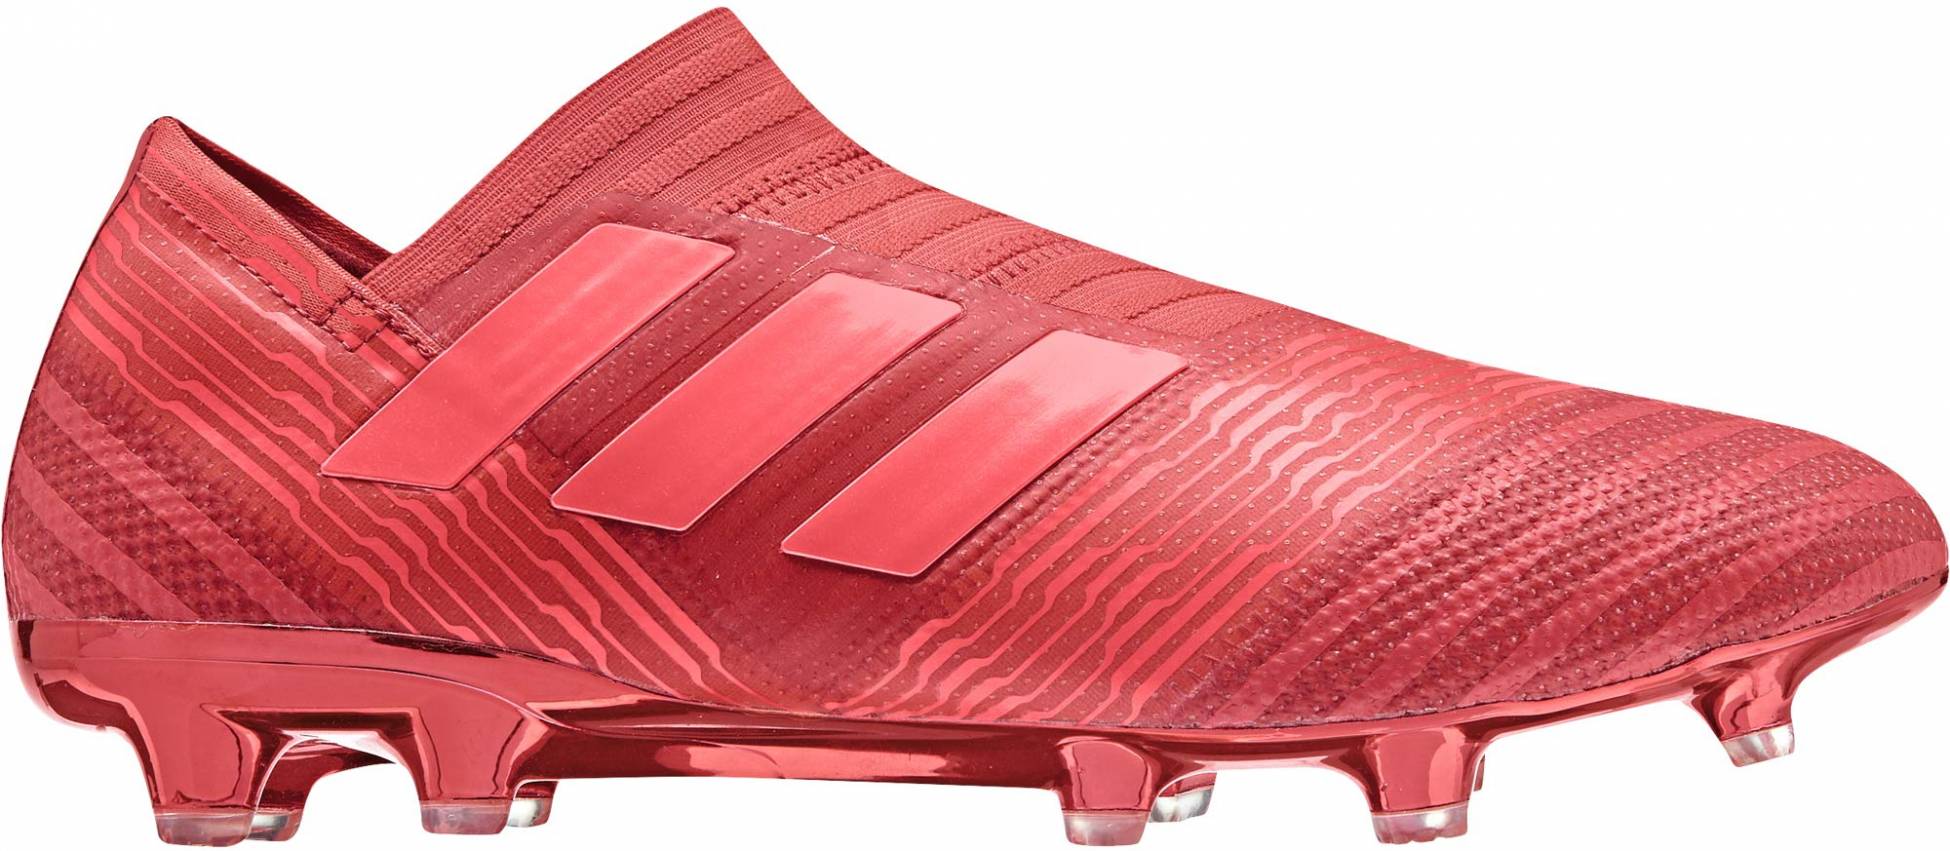 red adidas soccer boots